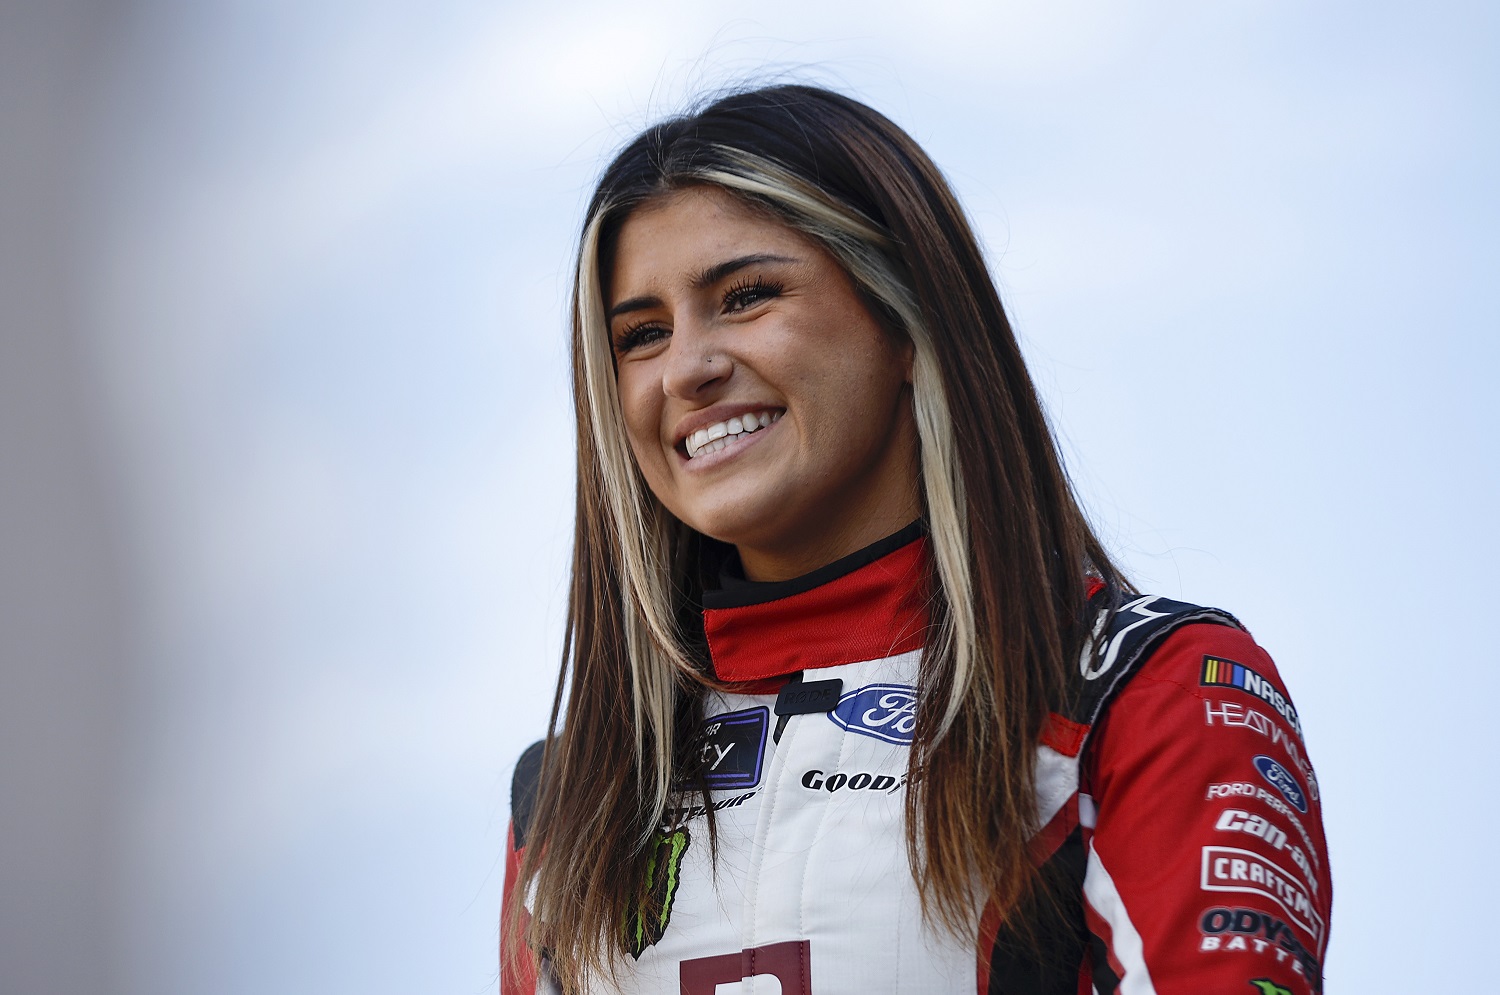 Hailie Deegan walks onstage during driver intros for the NASCAR Xfinity Series Alsco Uniforms 302 at Las Vegas Motor Speedway on Oct. 15, 2022. | Sean Gardner/Getty Images